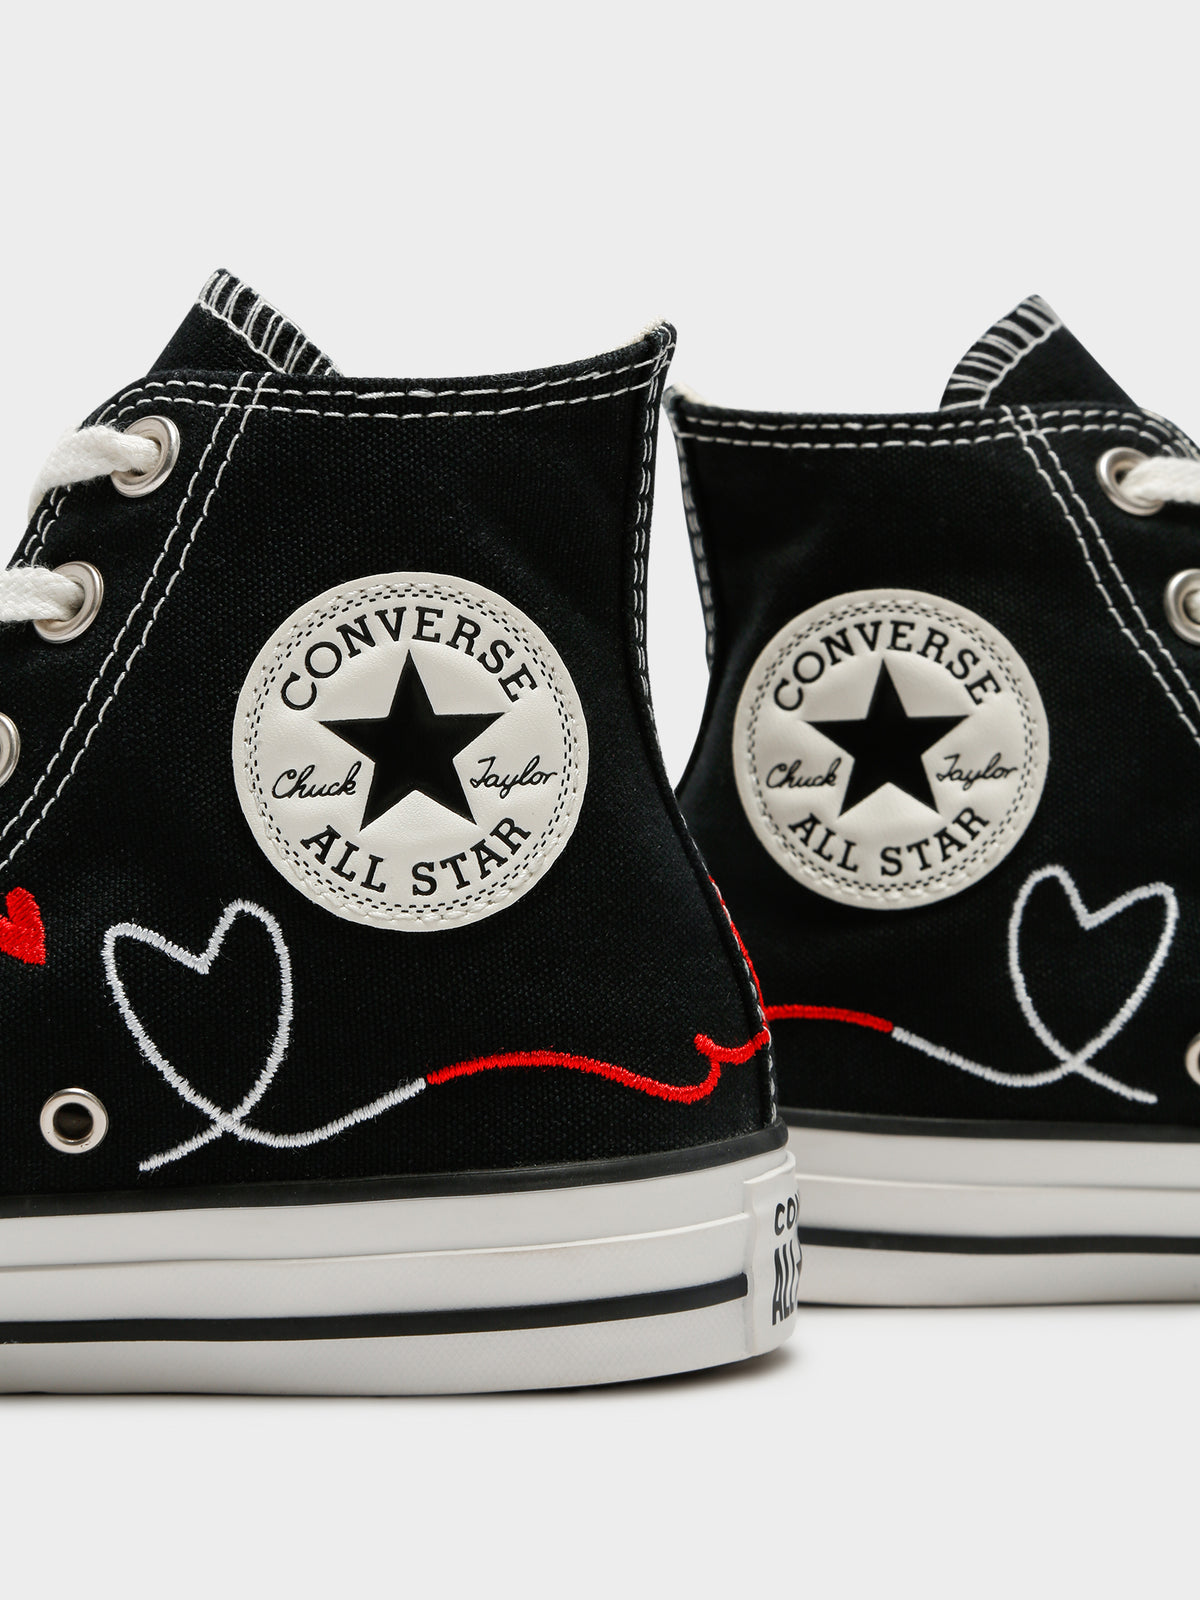 Unisex Made With Love Chuck Taylor All Star High Top Sneakers in Black